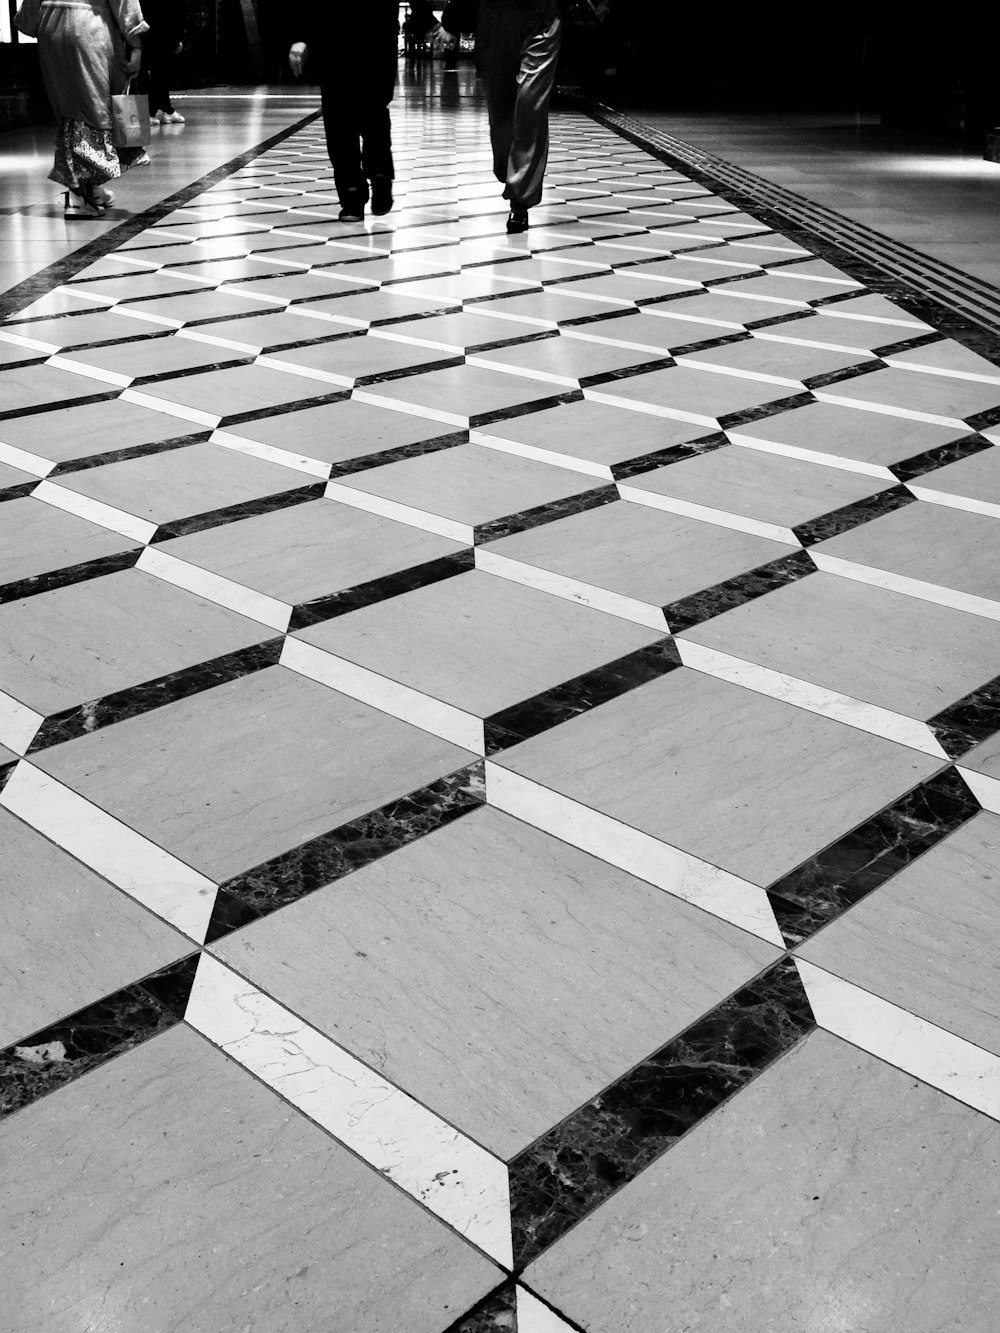 a black and white photo of people walking down a tiled floor